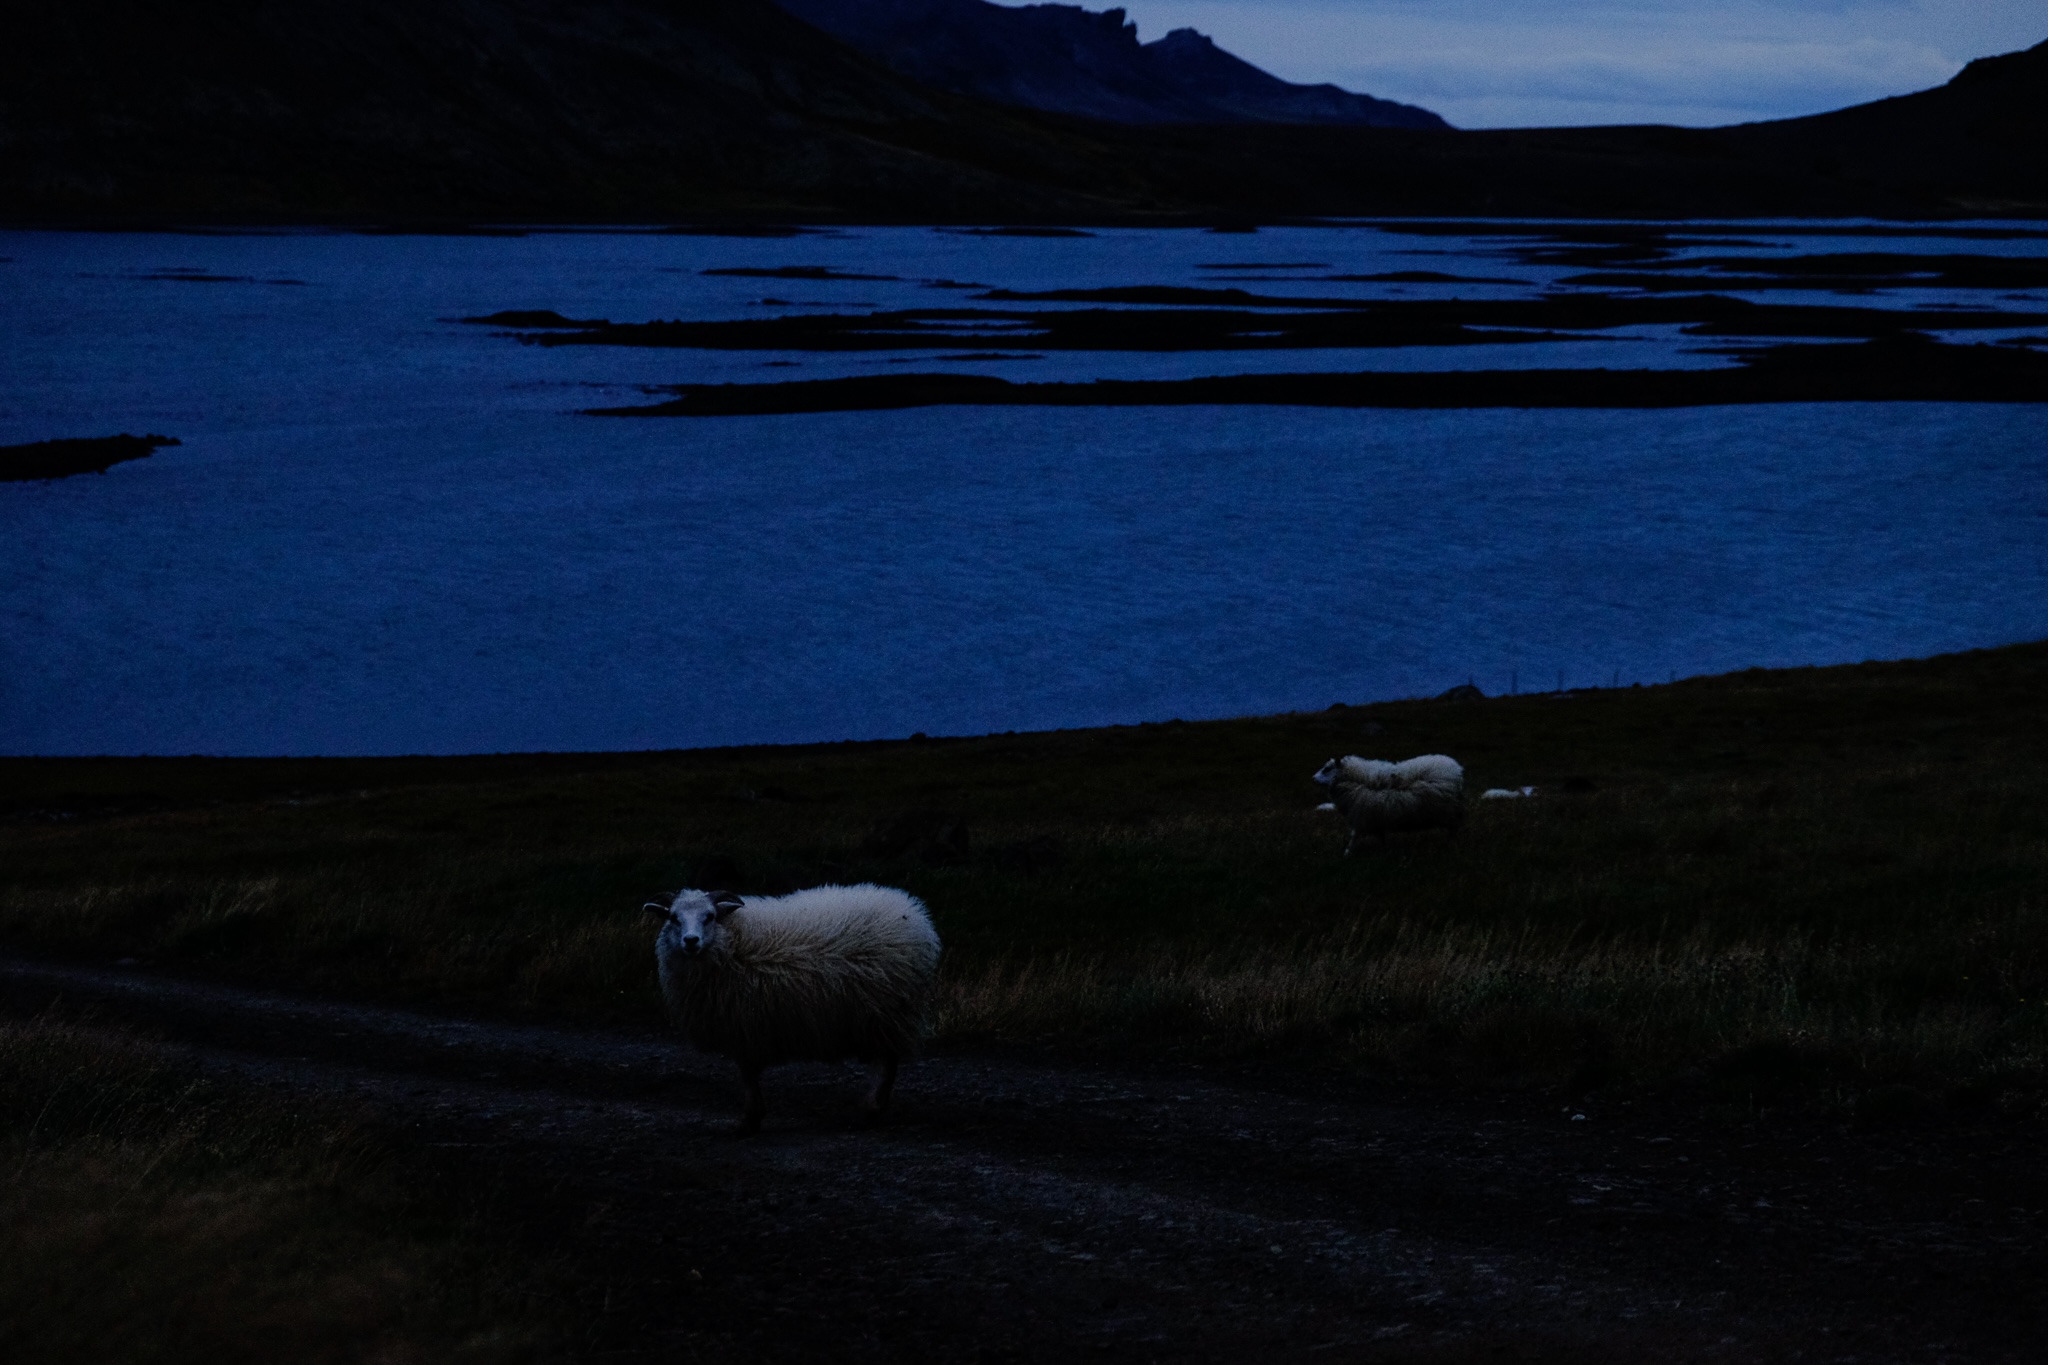 Sheep in a grassy hill on a farm in the late evening, one has ventured into the road and is looking directly at you